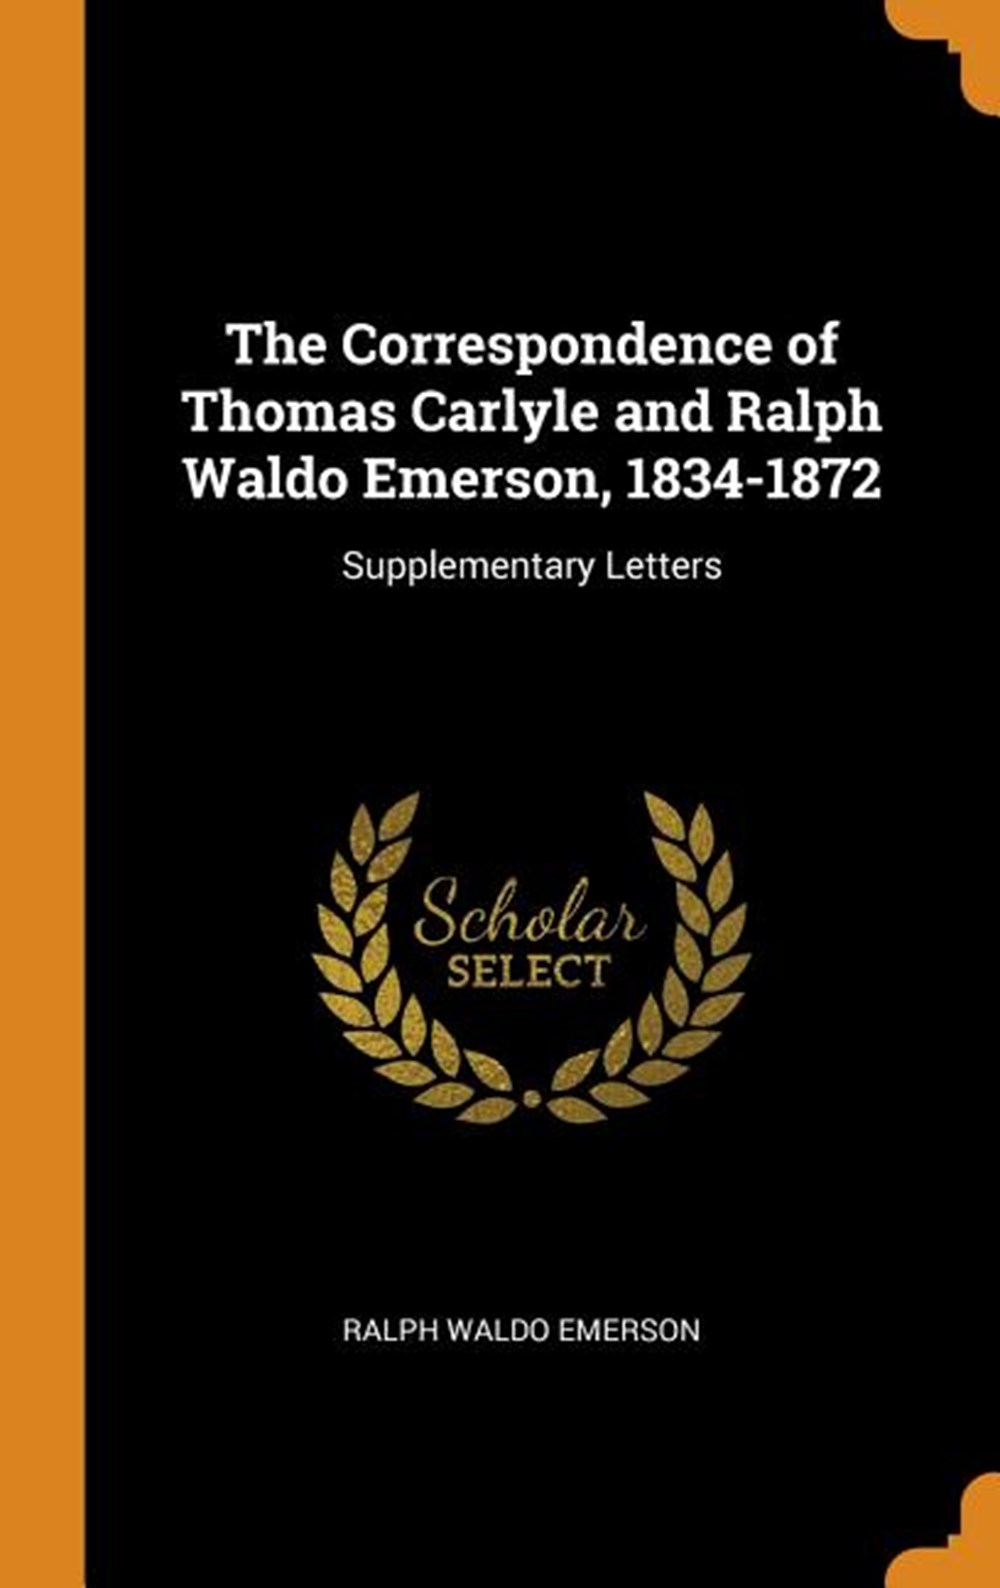 Correspondence of Thomas Carlyle and Ralph Waldo Emerson, 1834-1872 Supplementary Letters